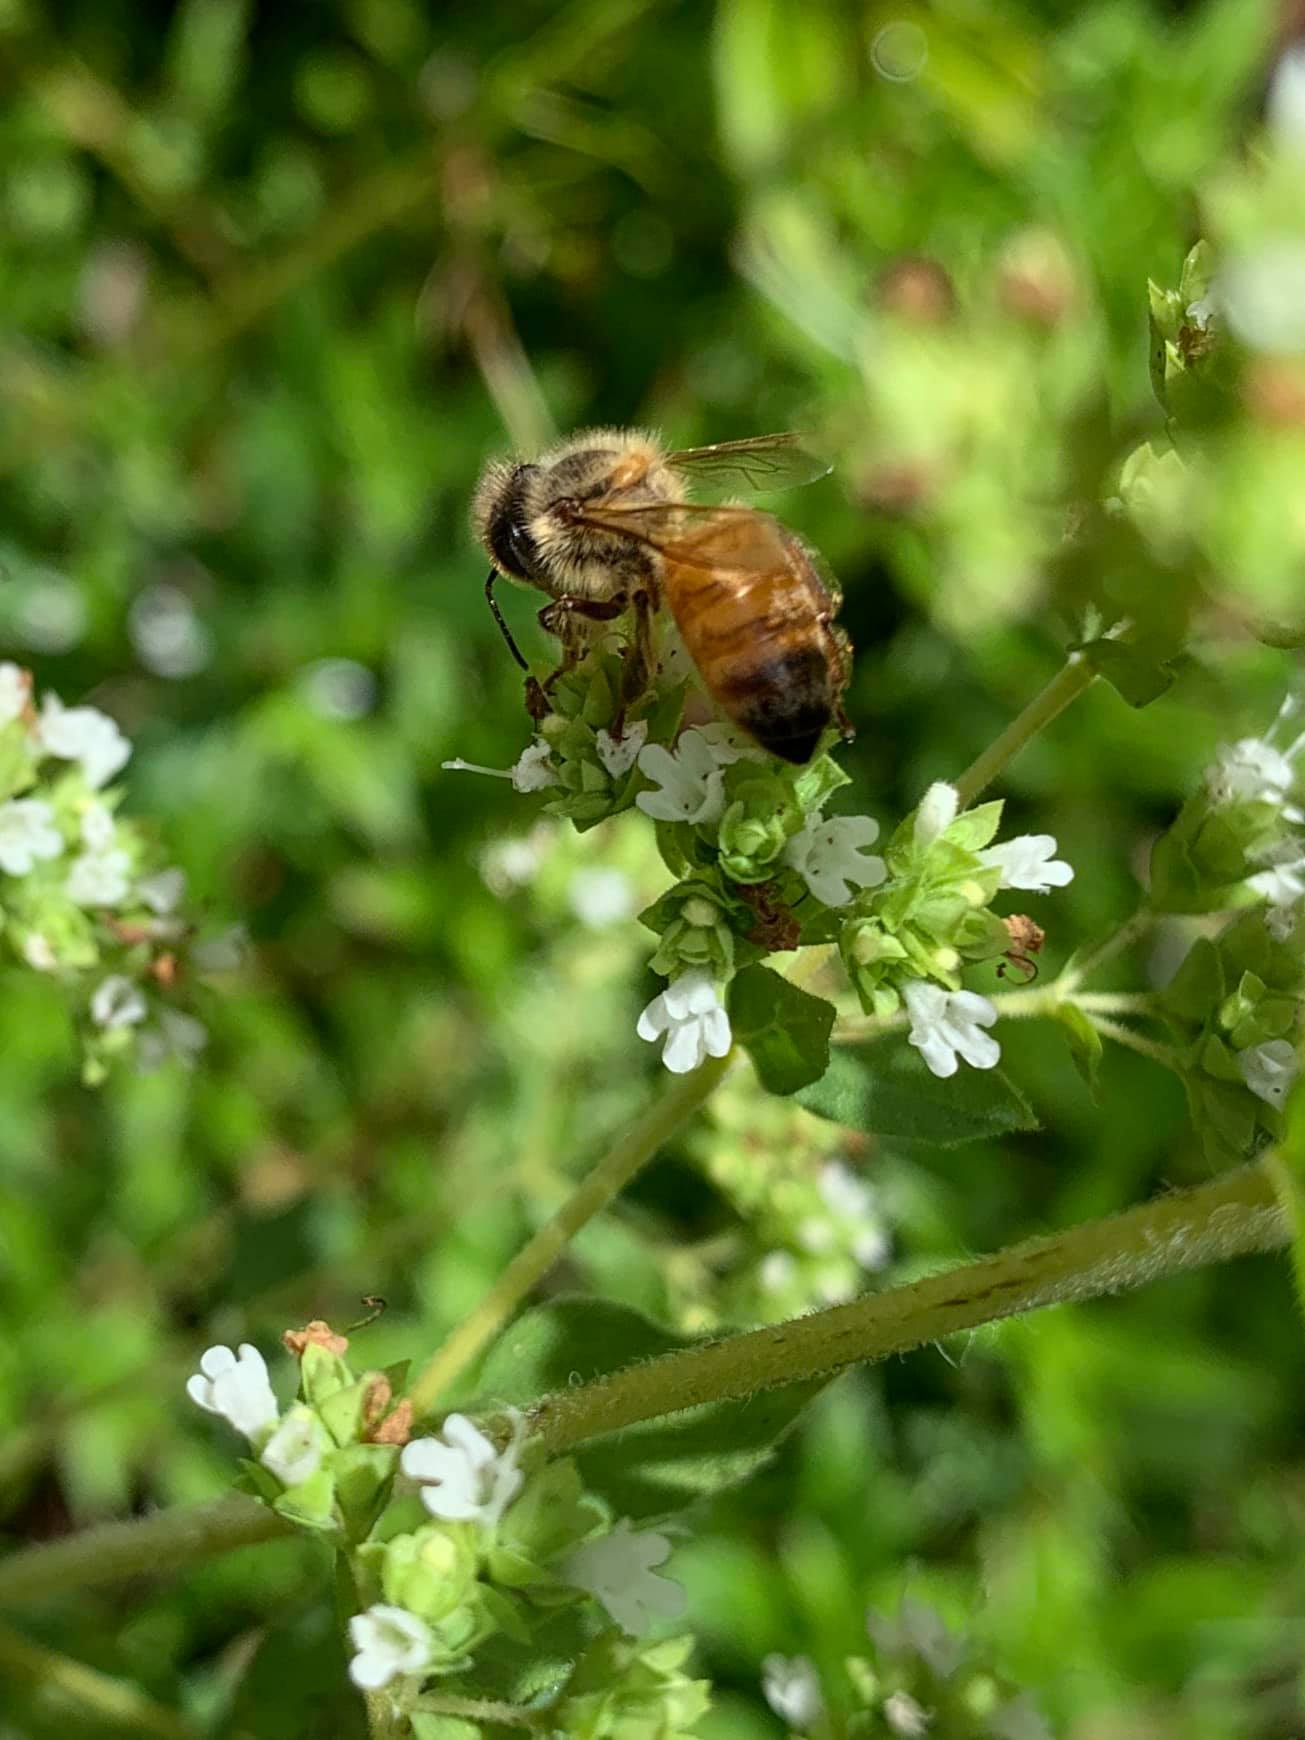 A foraging worker bee